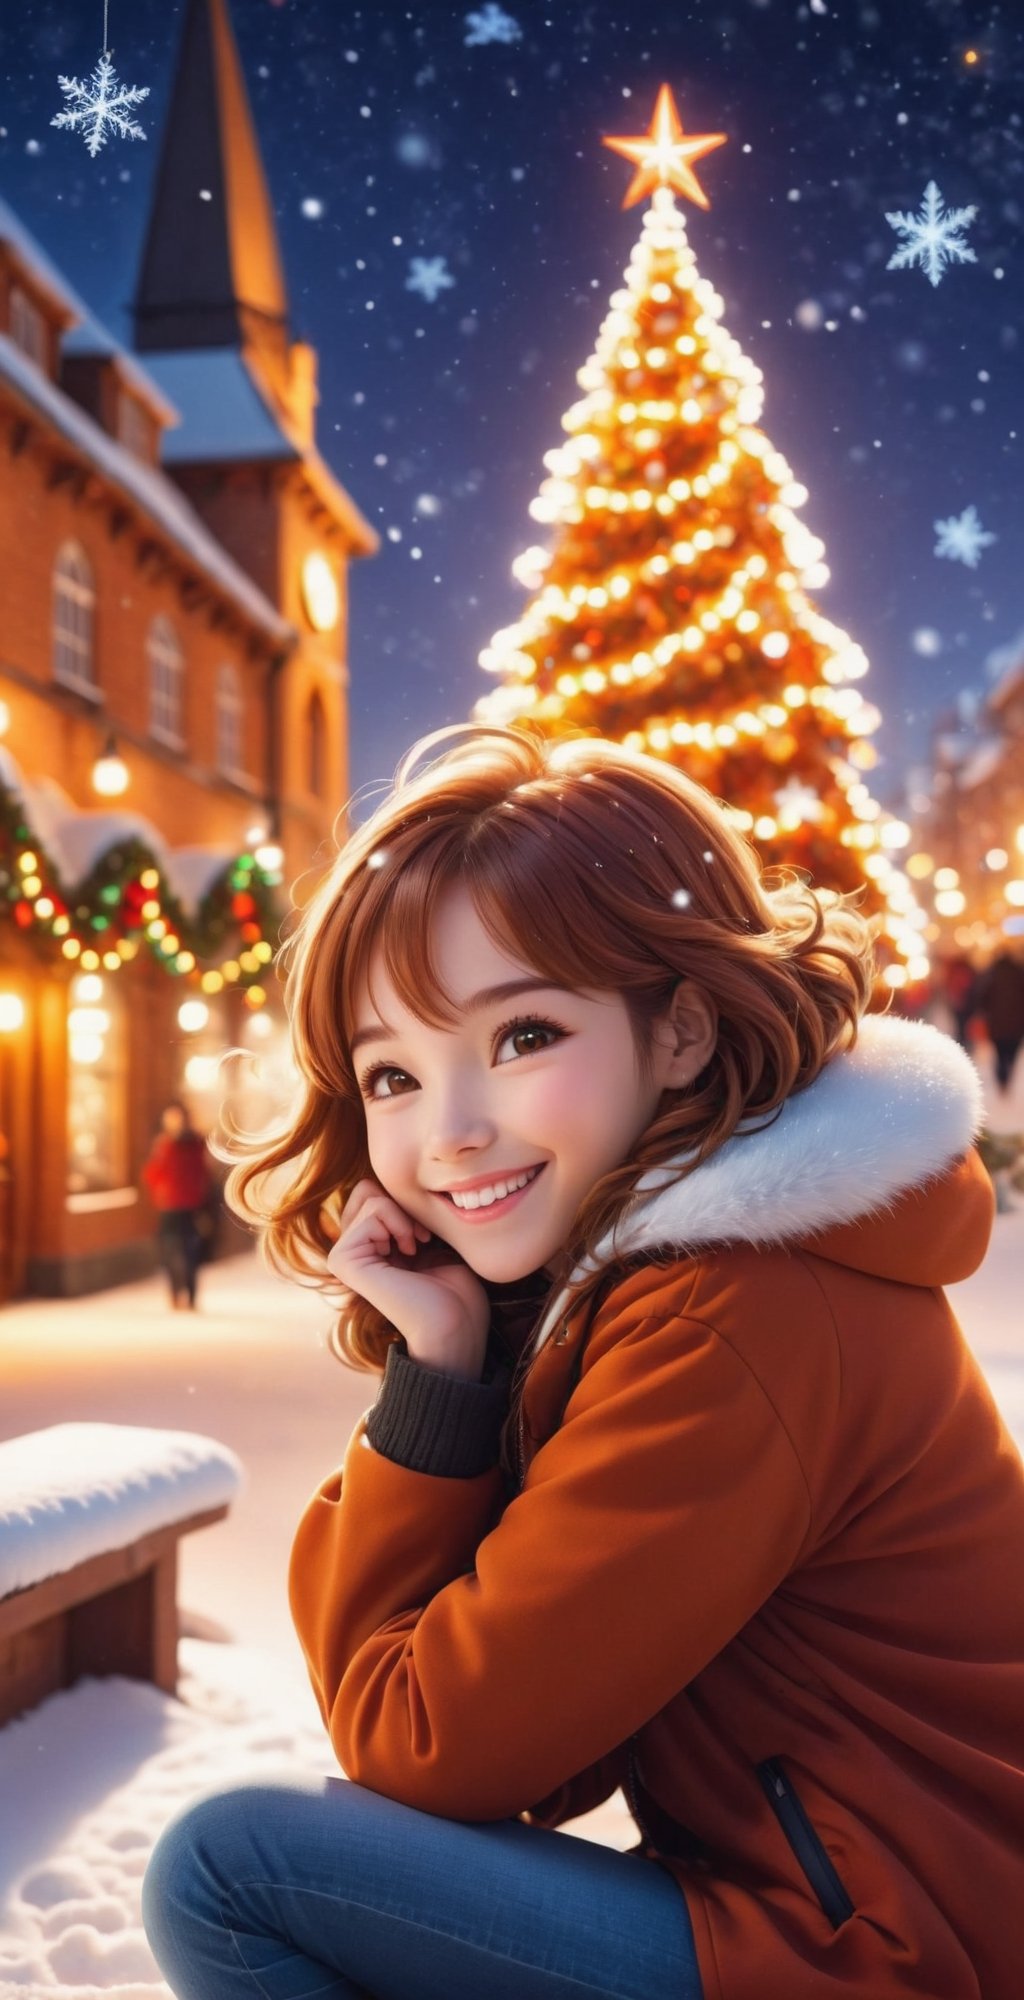 ("MERRY CHRISTMAS" text logo), A happily smiling woman (beautiful face), (Christmas Party: 1.5), brown and orange tones, Christmas, grains of light, clock tower, glowing illuminations, illuminated scenery, silver world, snow, glowing snowflakes, Christmas neon lights, cute girl curled up to warm her hands, warm light, brick cityscape, bench, Christmas tree, short hair, happiness, joyful smiles. Epic, Celestial, decoration, fantasy world, cute world,Anime,Text